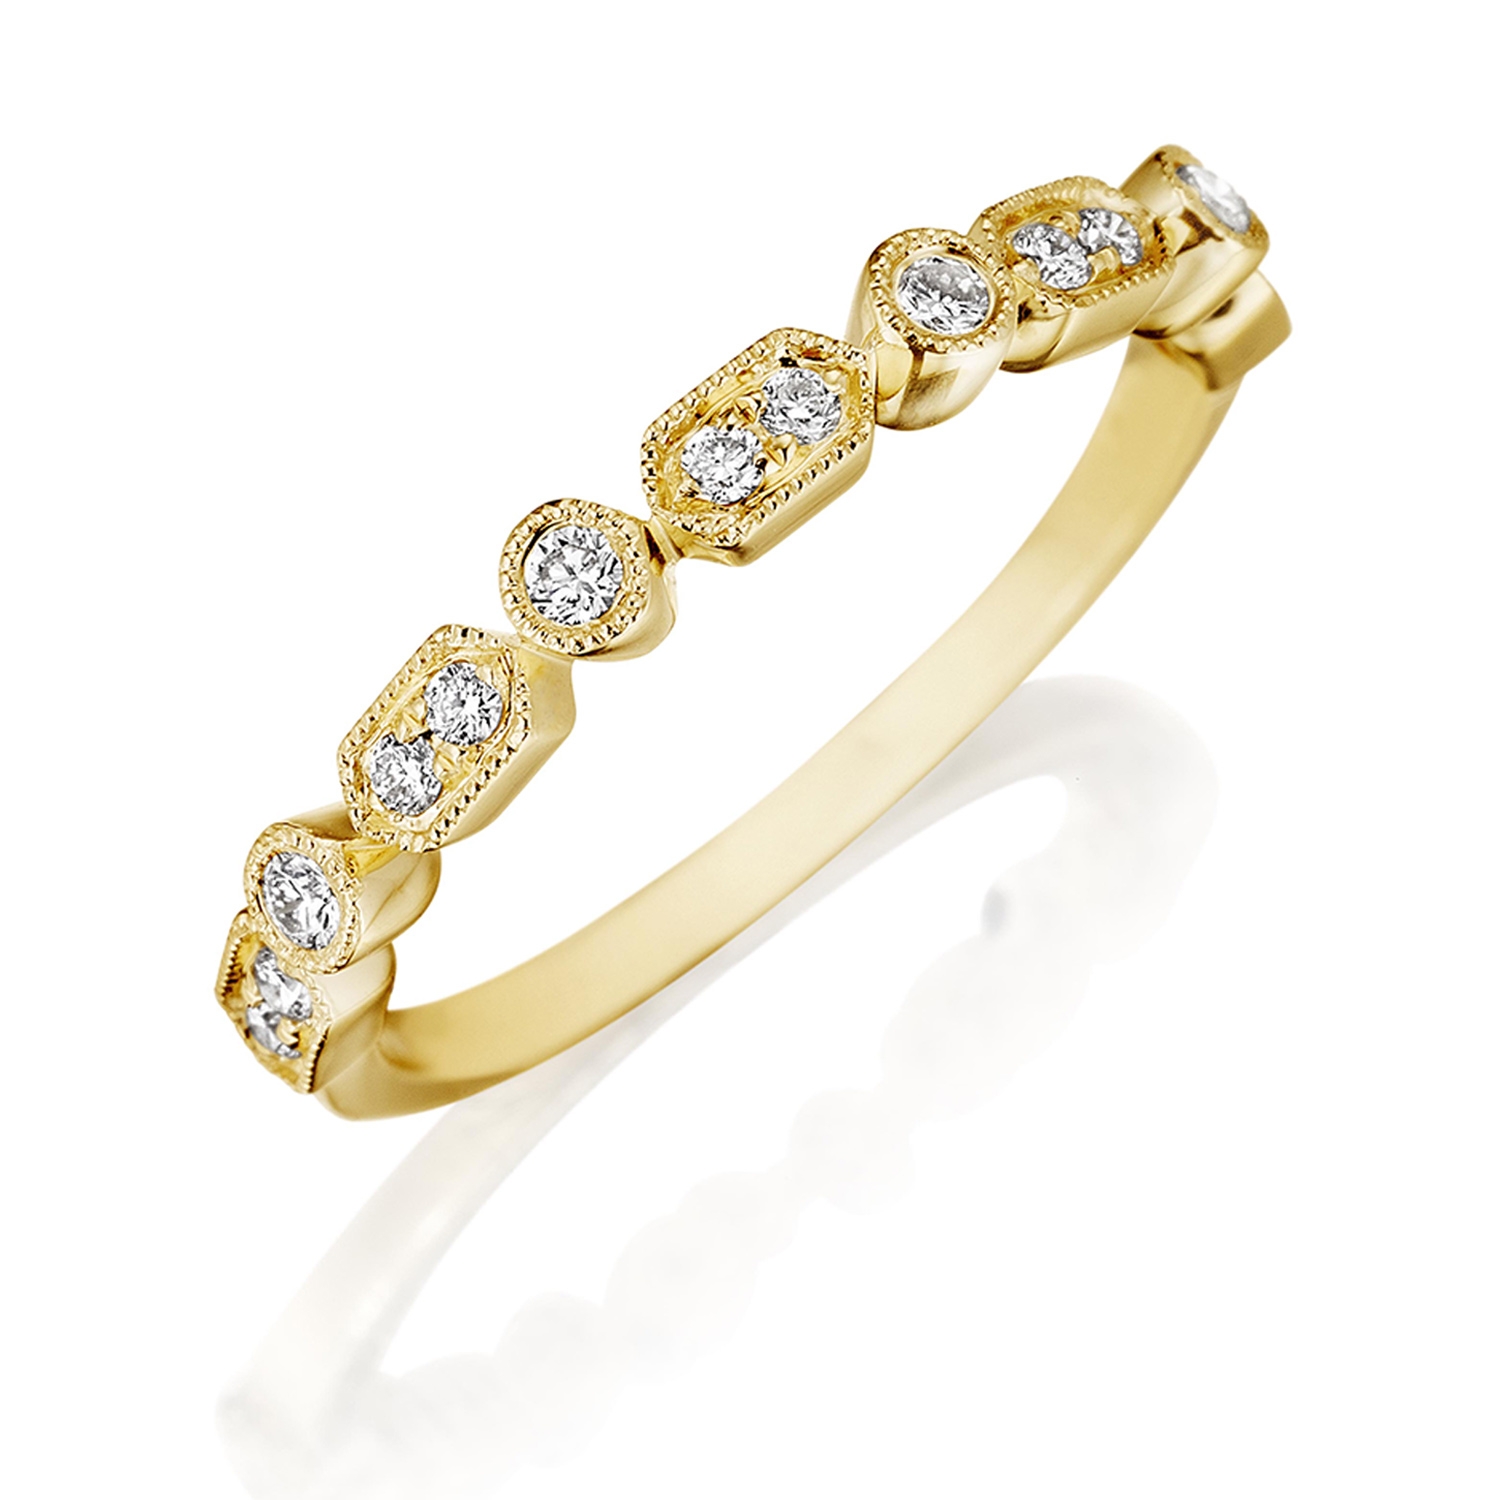 Henri Daussi R43-3 Yellow Gold Bead and Bezel Set Diamond Band with Miligrain Detail